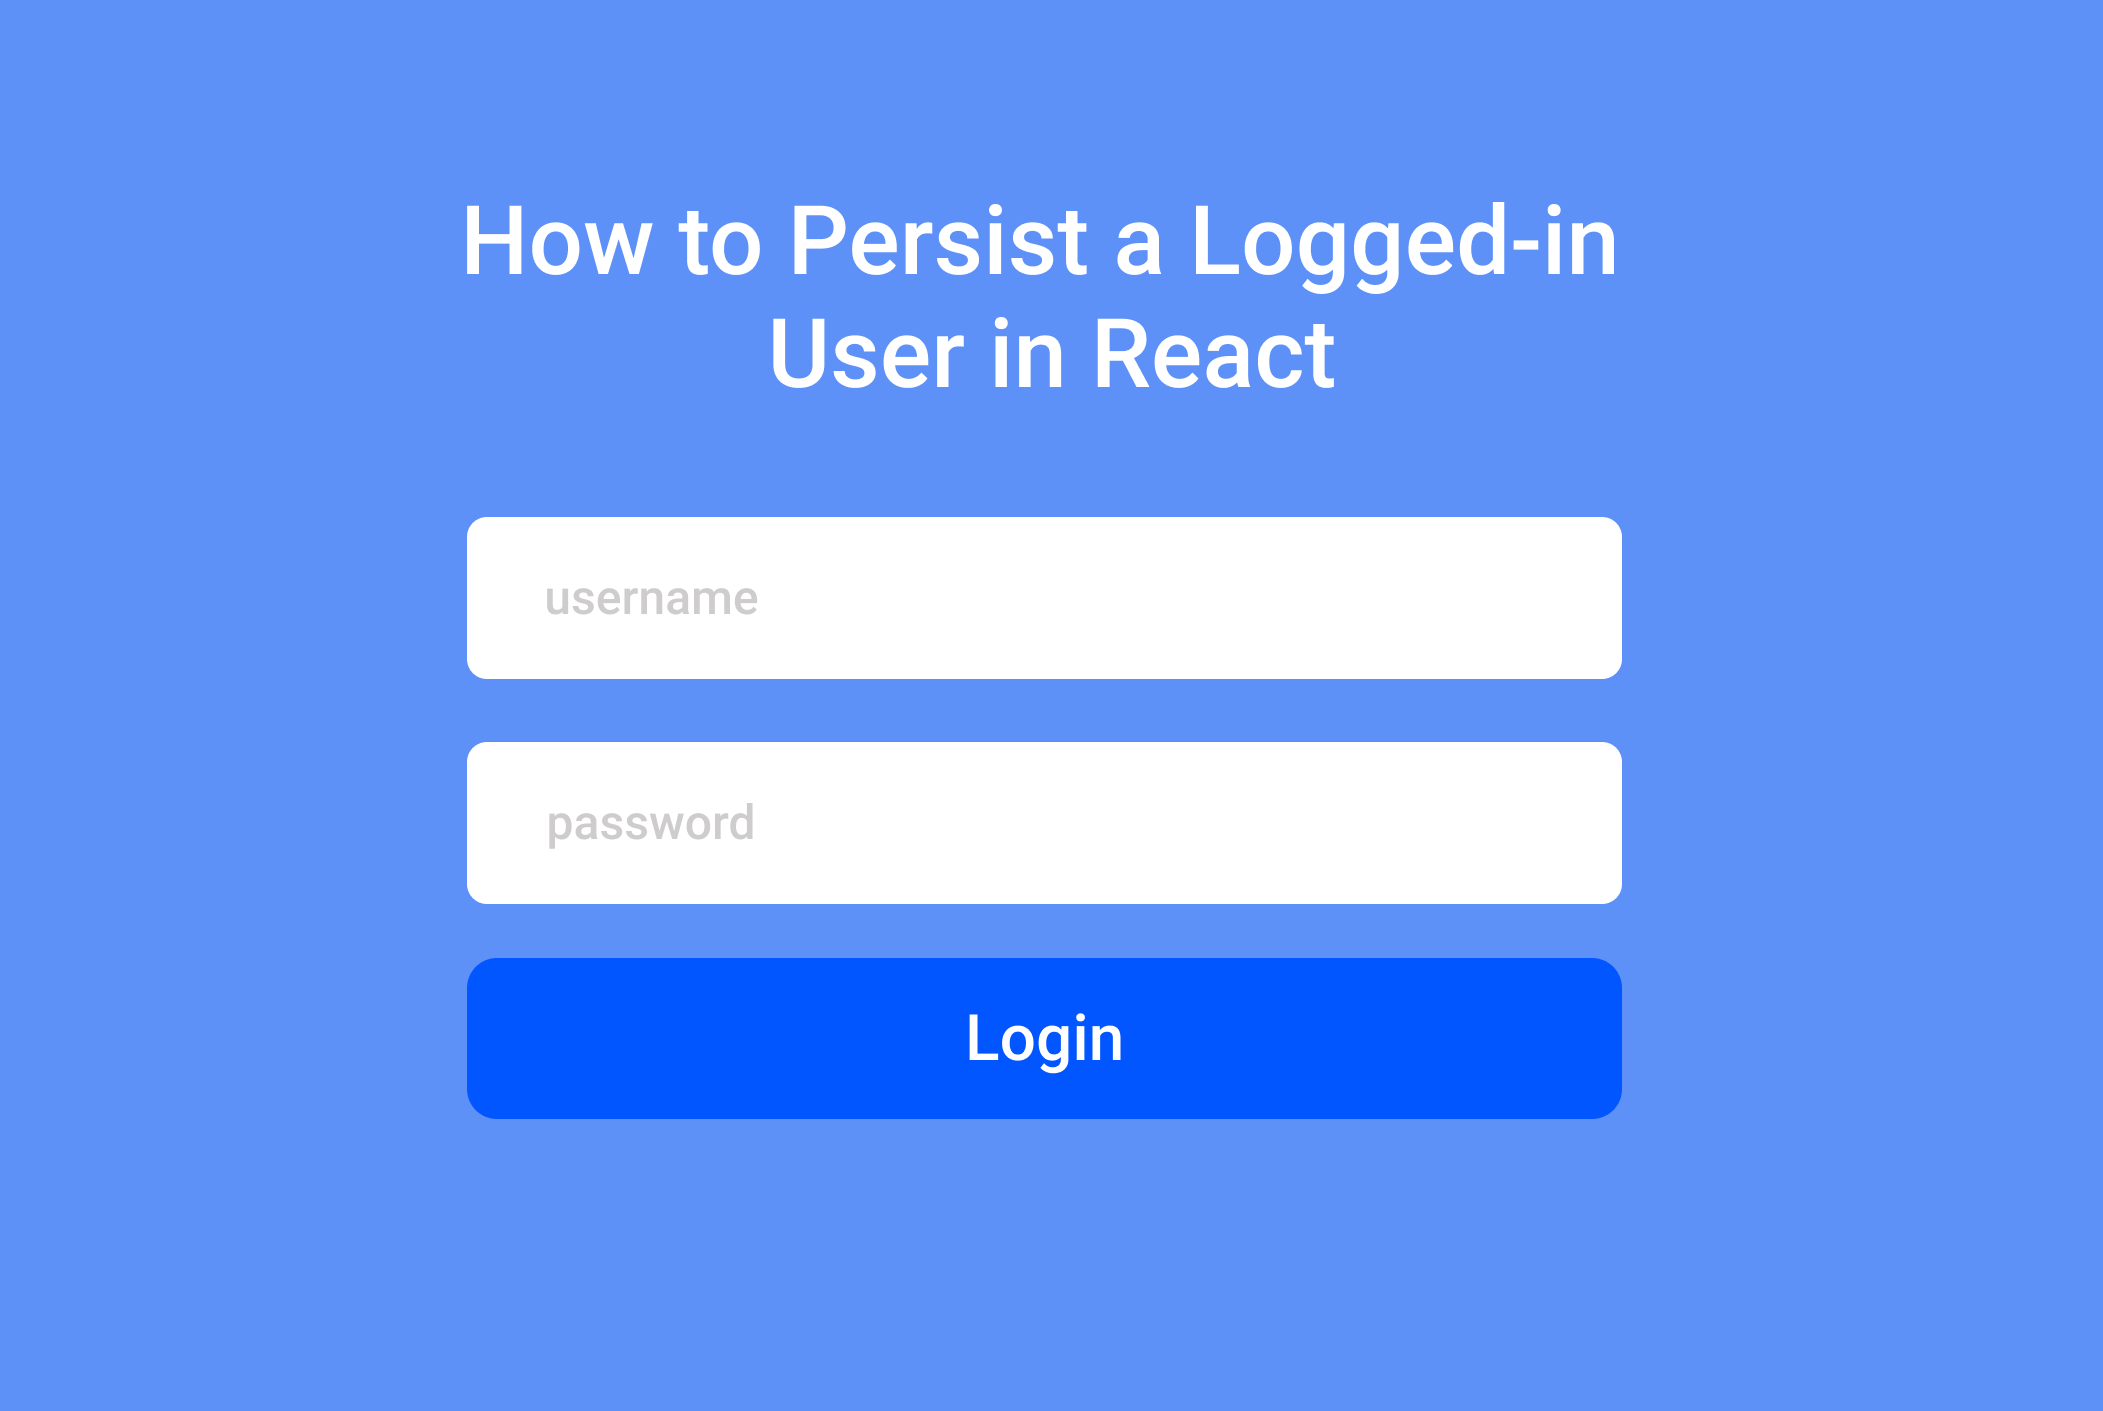 How to Persist a Logged-in User in React